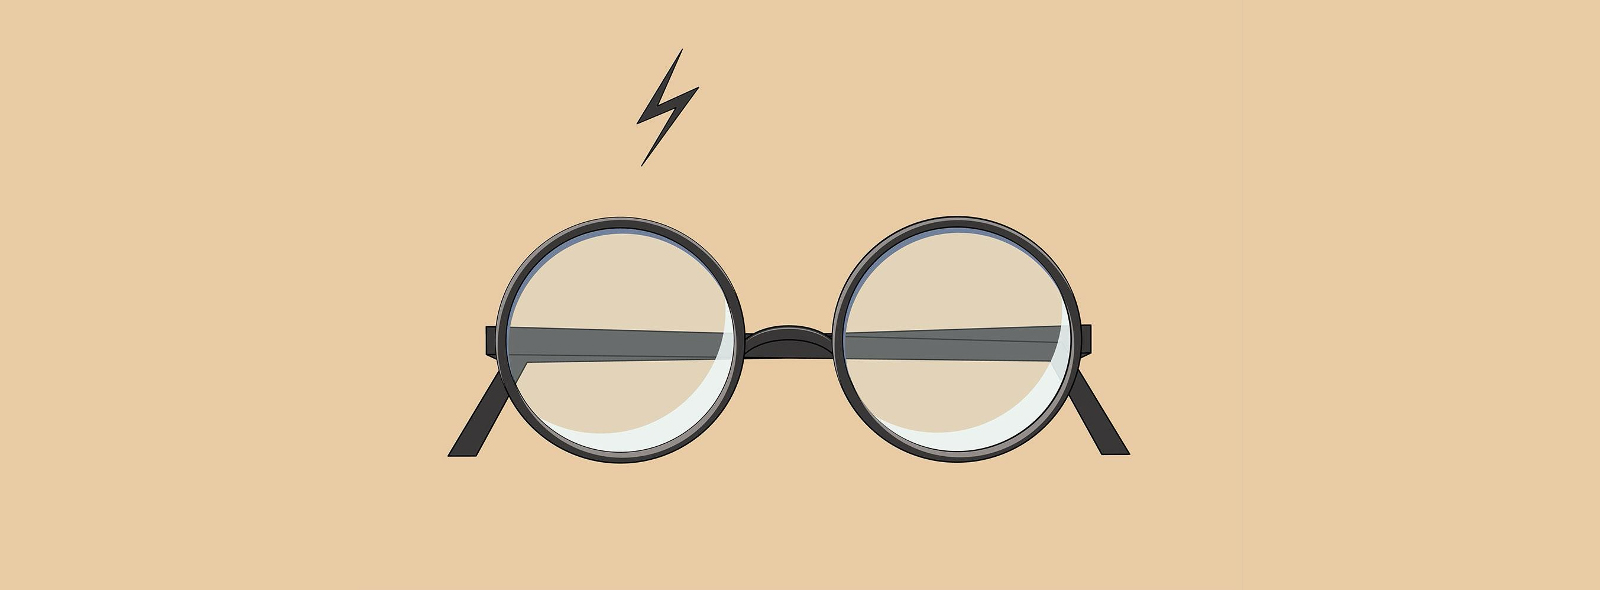 Harry Potter images are now in Design Space